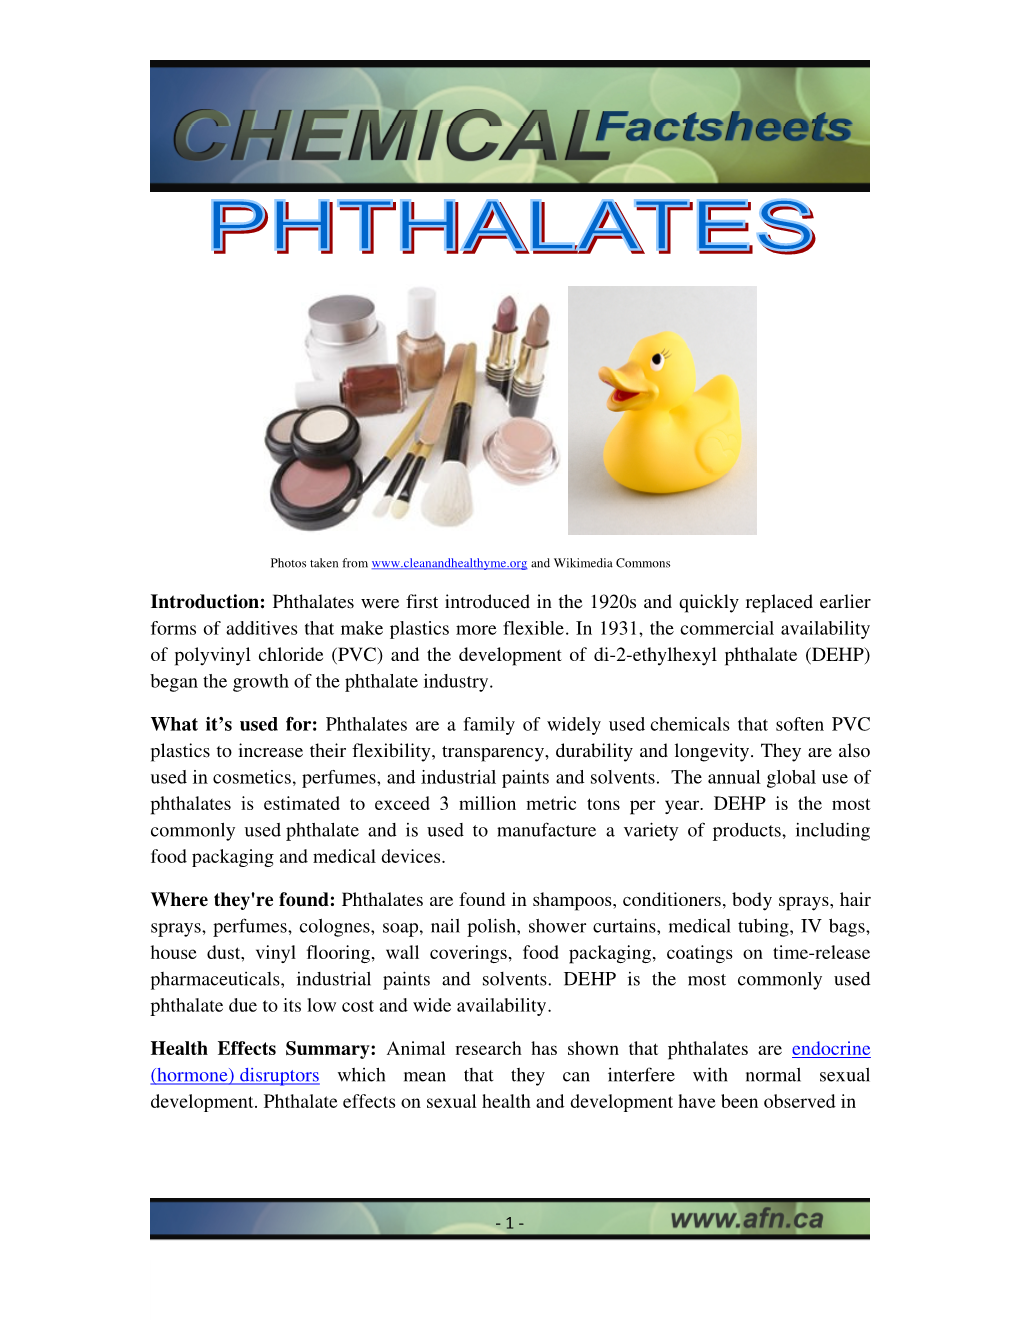 Introduction: Phthalates Were First Introduced in the 1920S and Quickly Replaced Earlier Forms of Additives That Make Plastics More Flexible